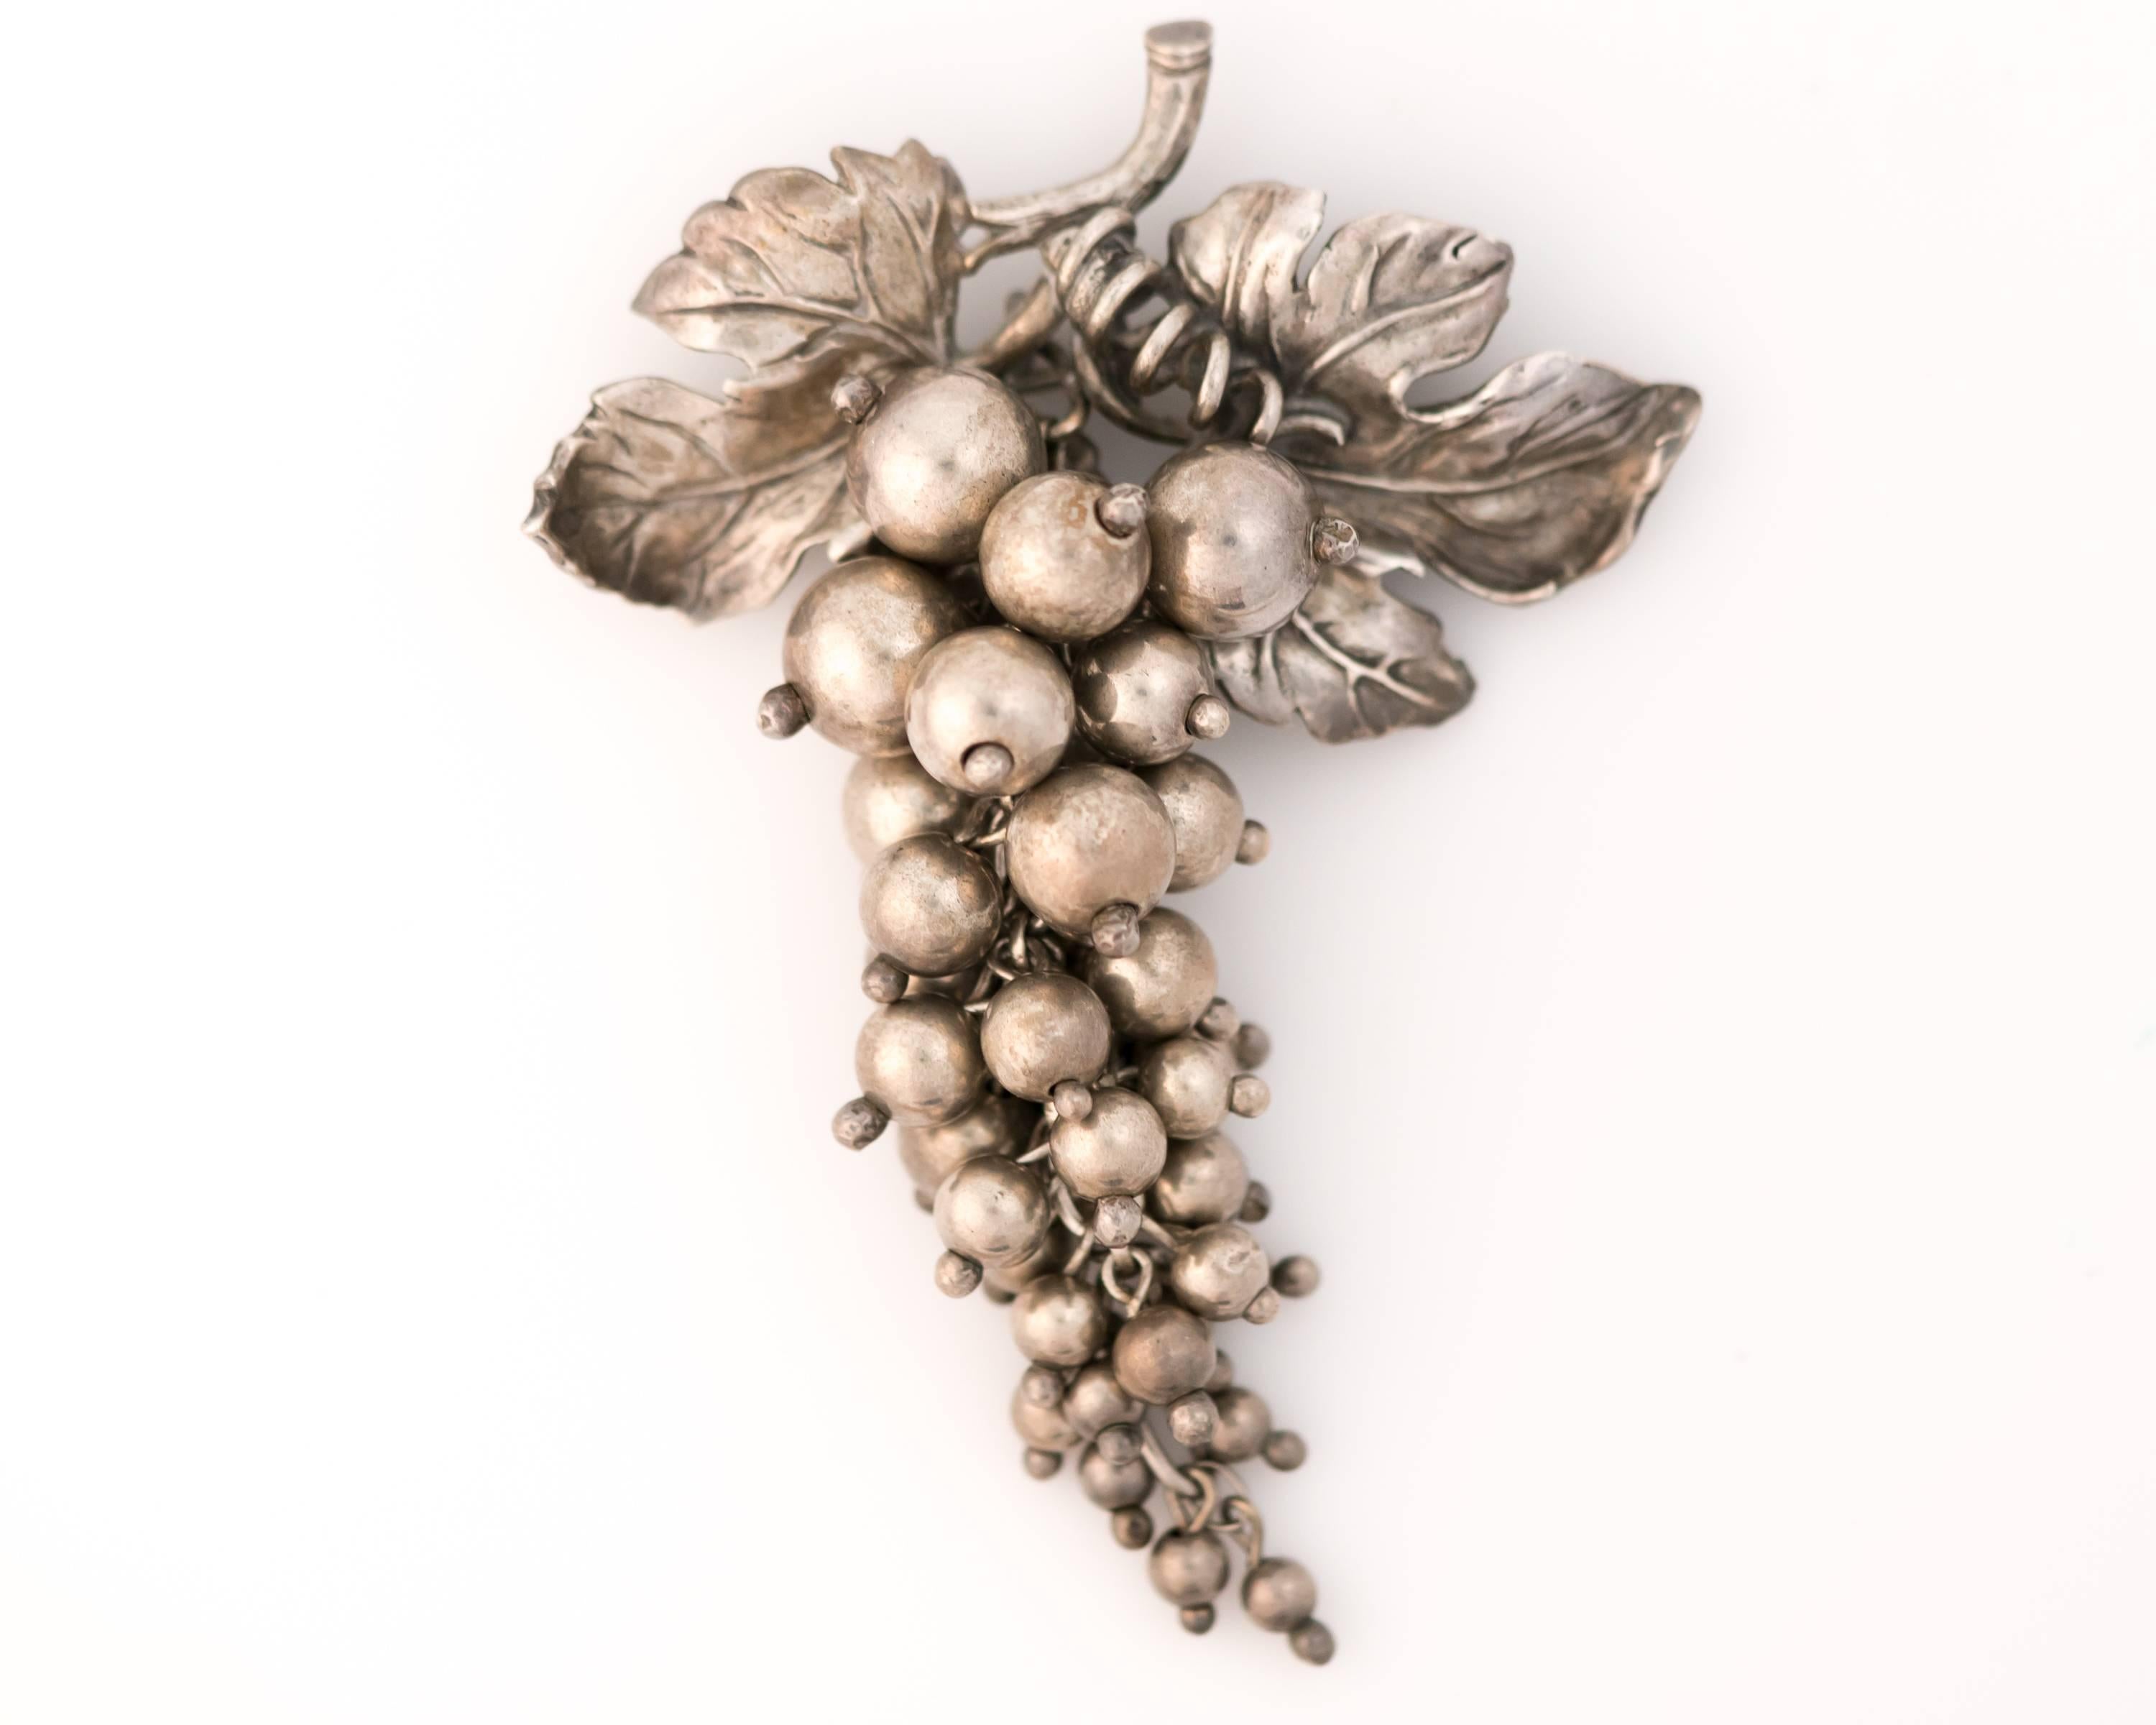 This Highly Collectible 1960s Retro Sterling Silver Brooch is gorgeous and fun! 
It features a cluster of silver grapes in varying sizes graduated from larger to smaller and from top to bottom. Each silver grape is attached to a central chain which